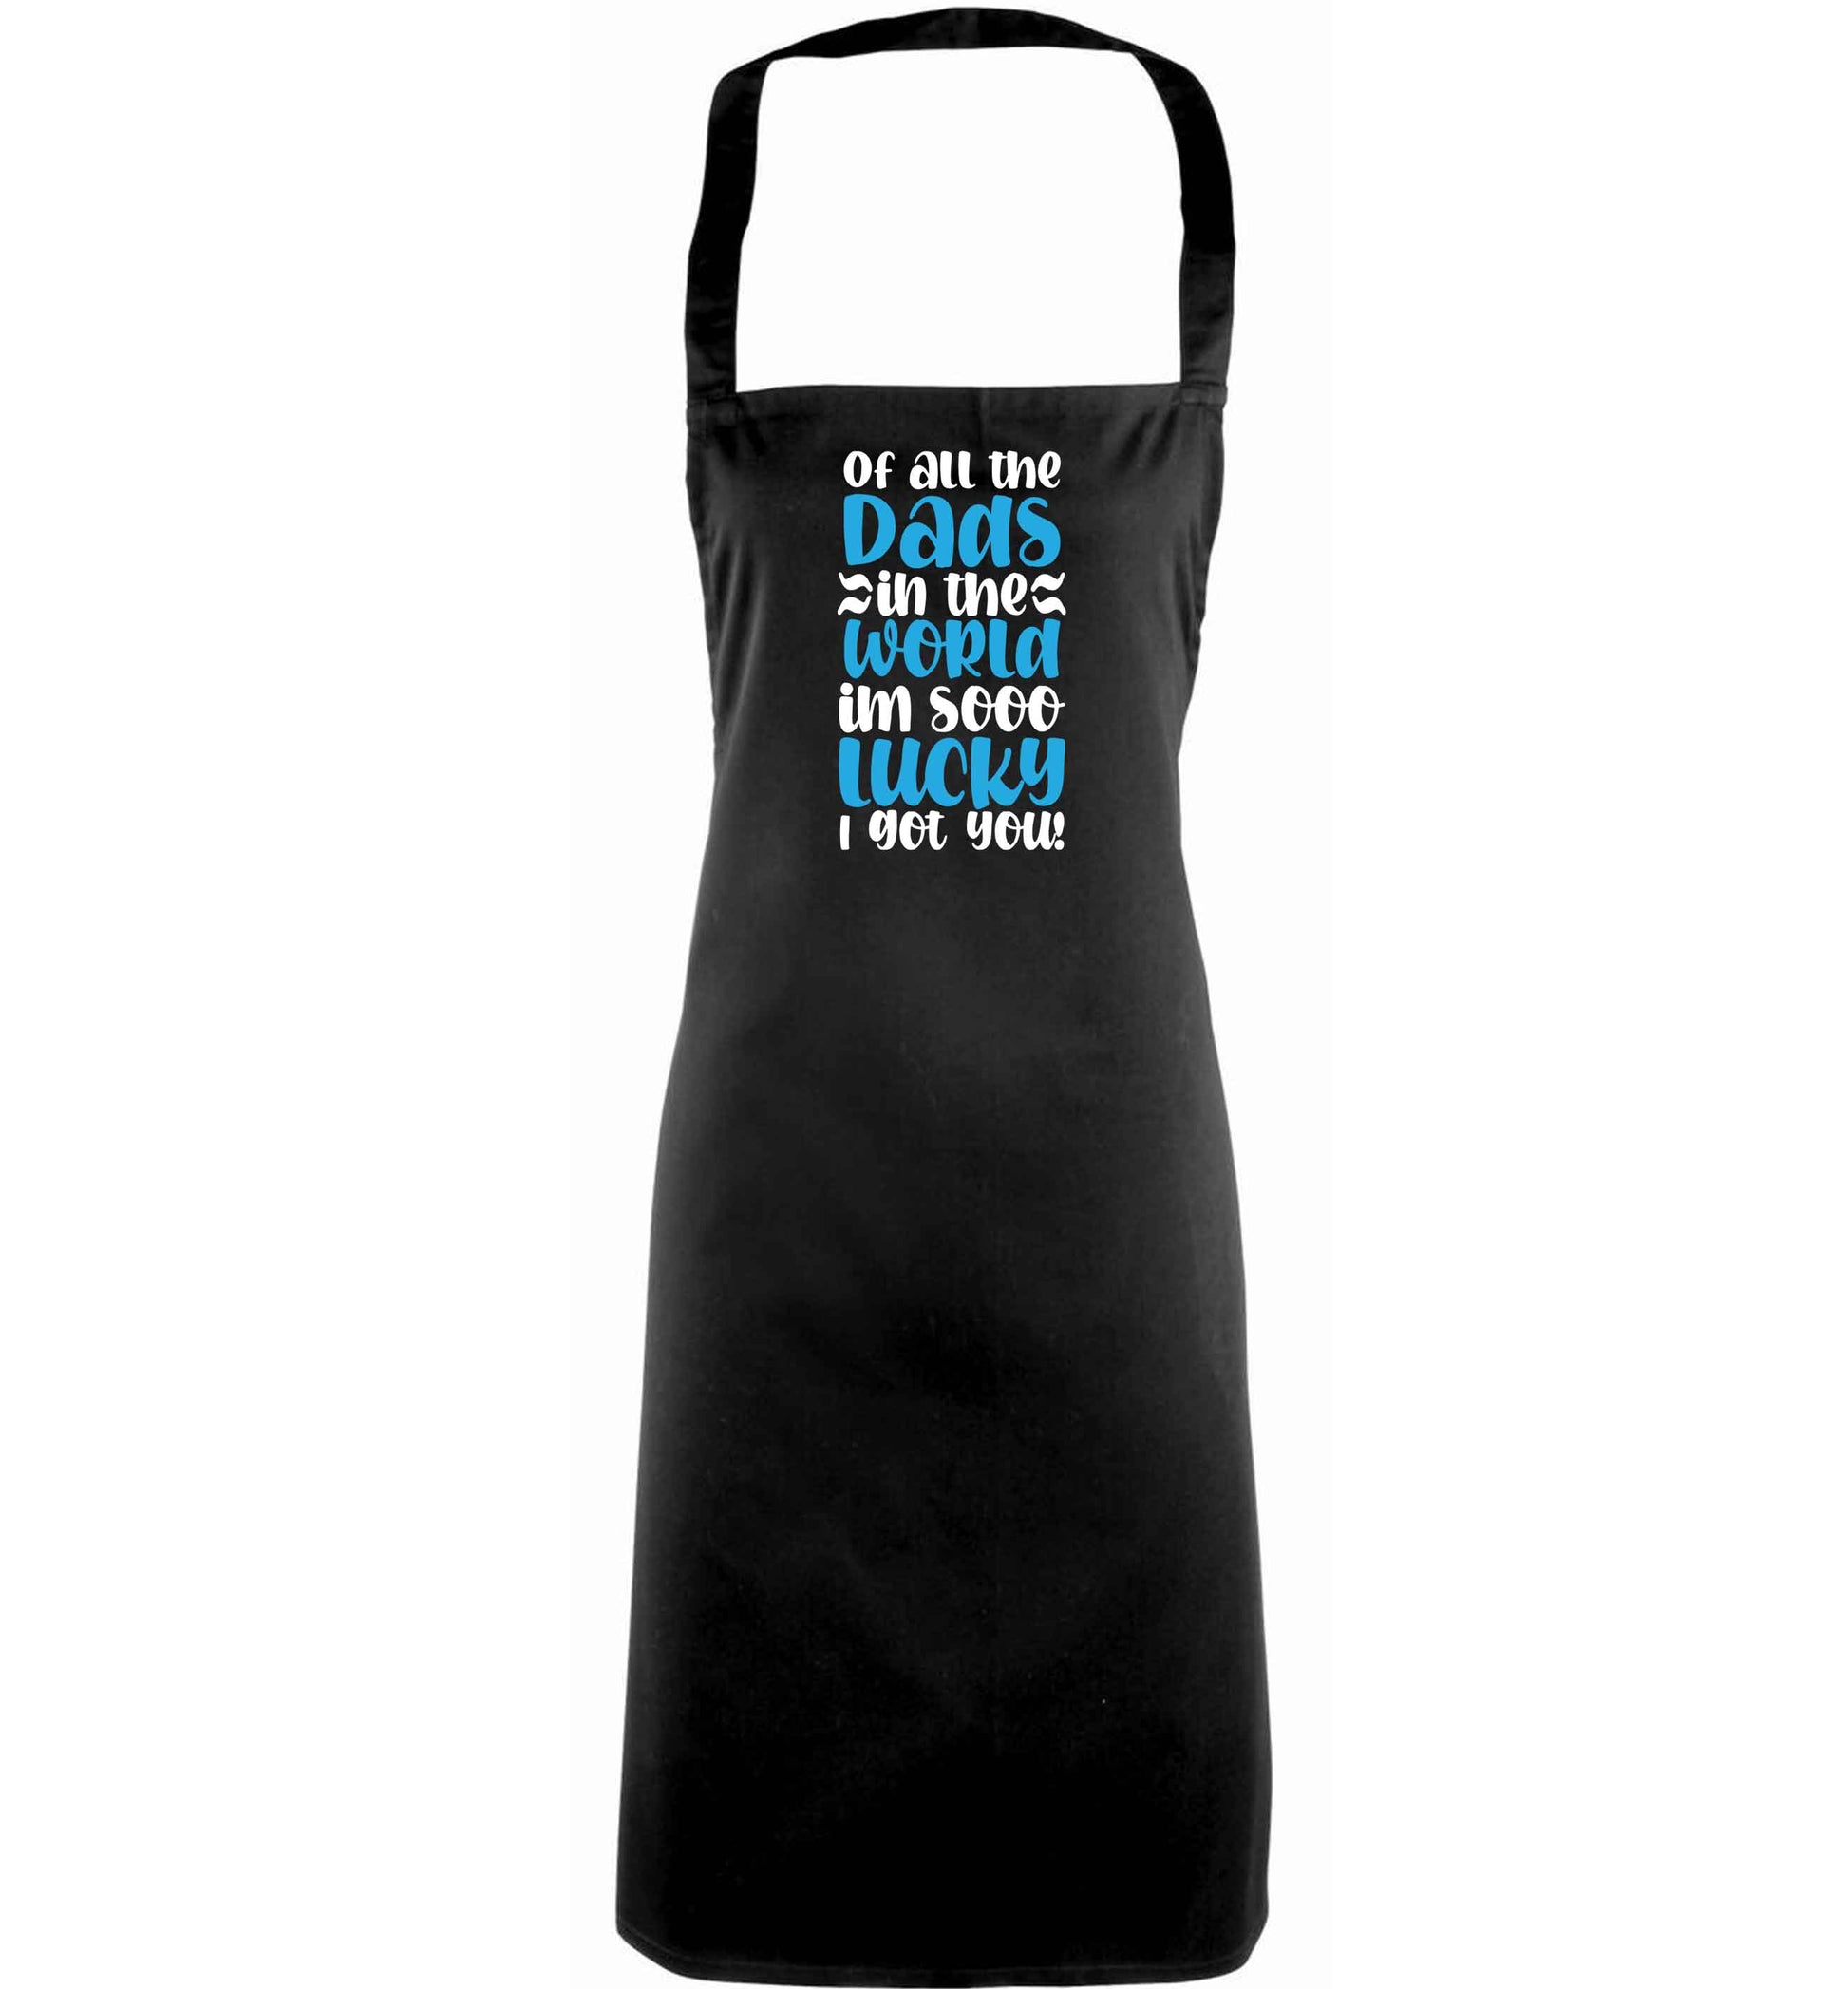 Of all the Dads in the world I'm so lucky I got you adults black apron